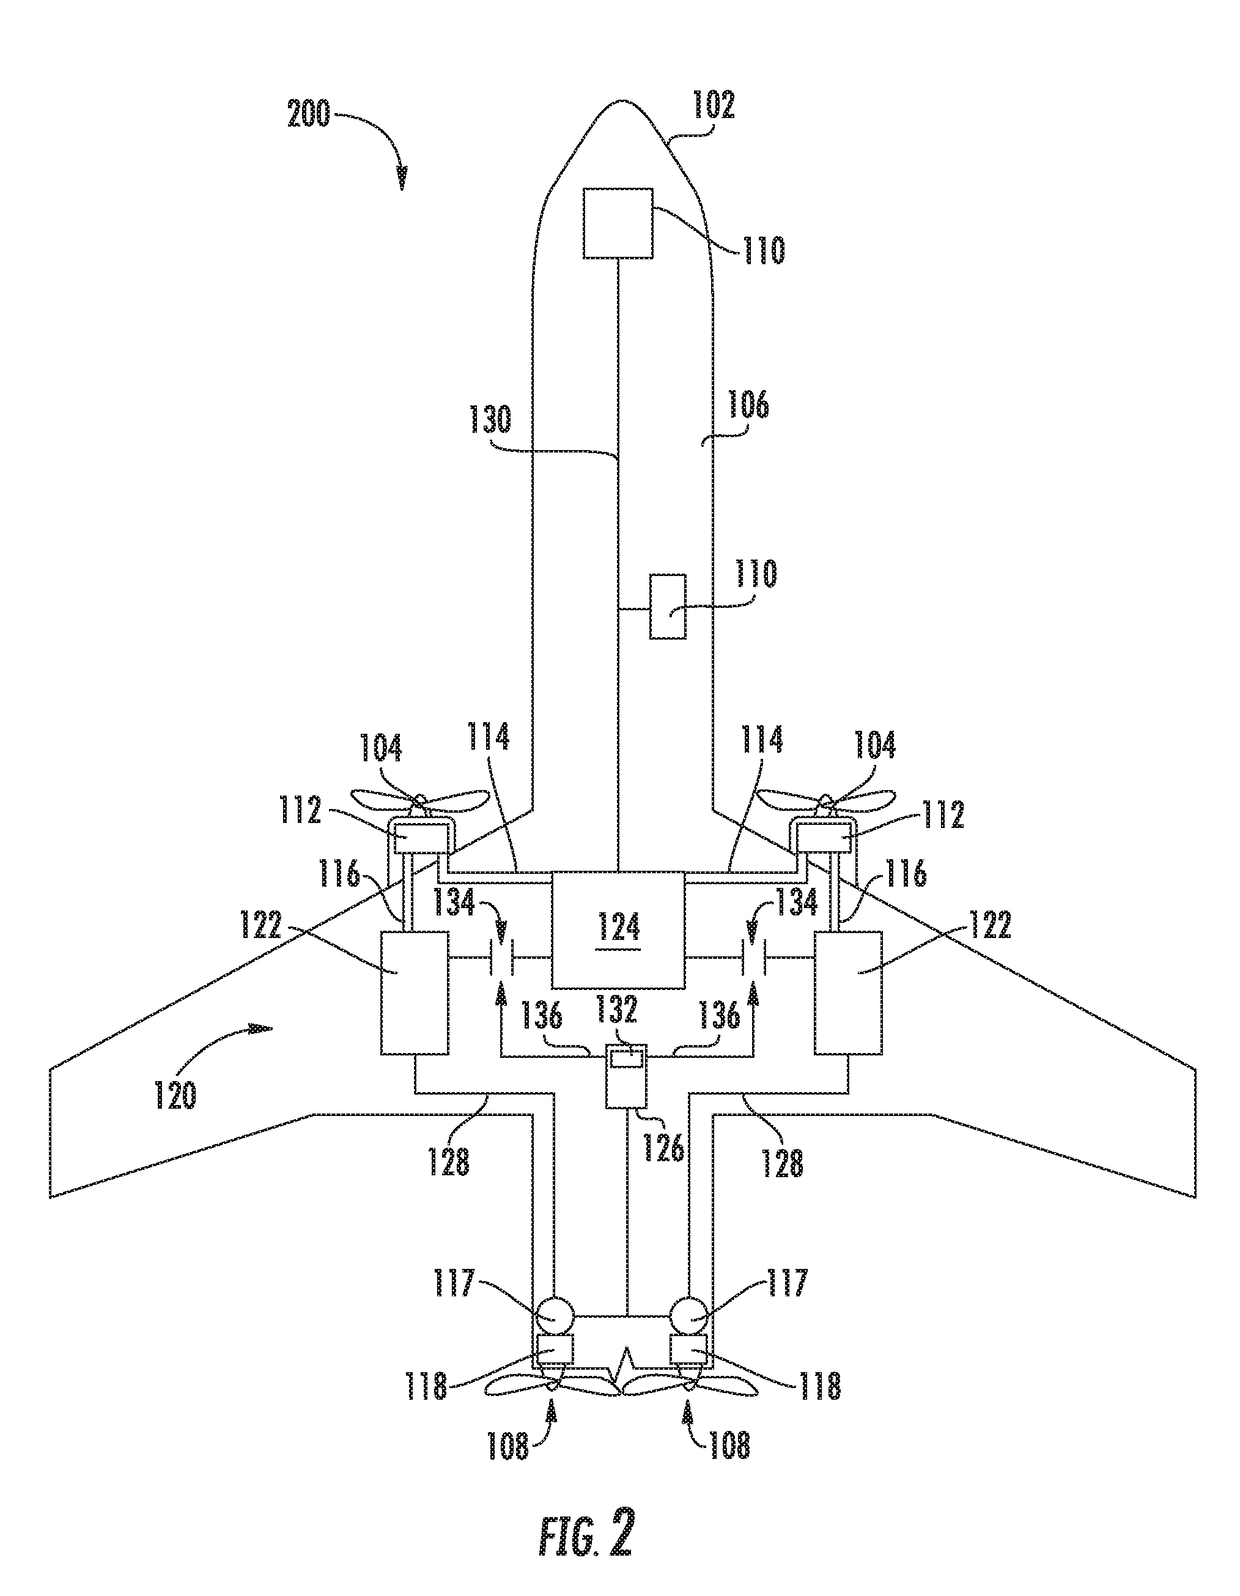 Hybrid Power System for an Aircraft